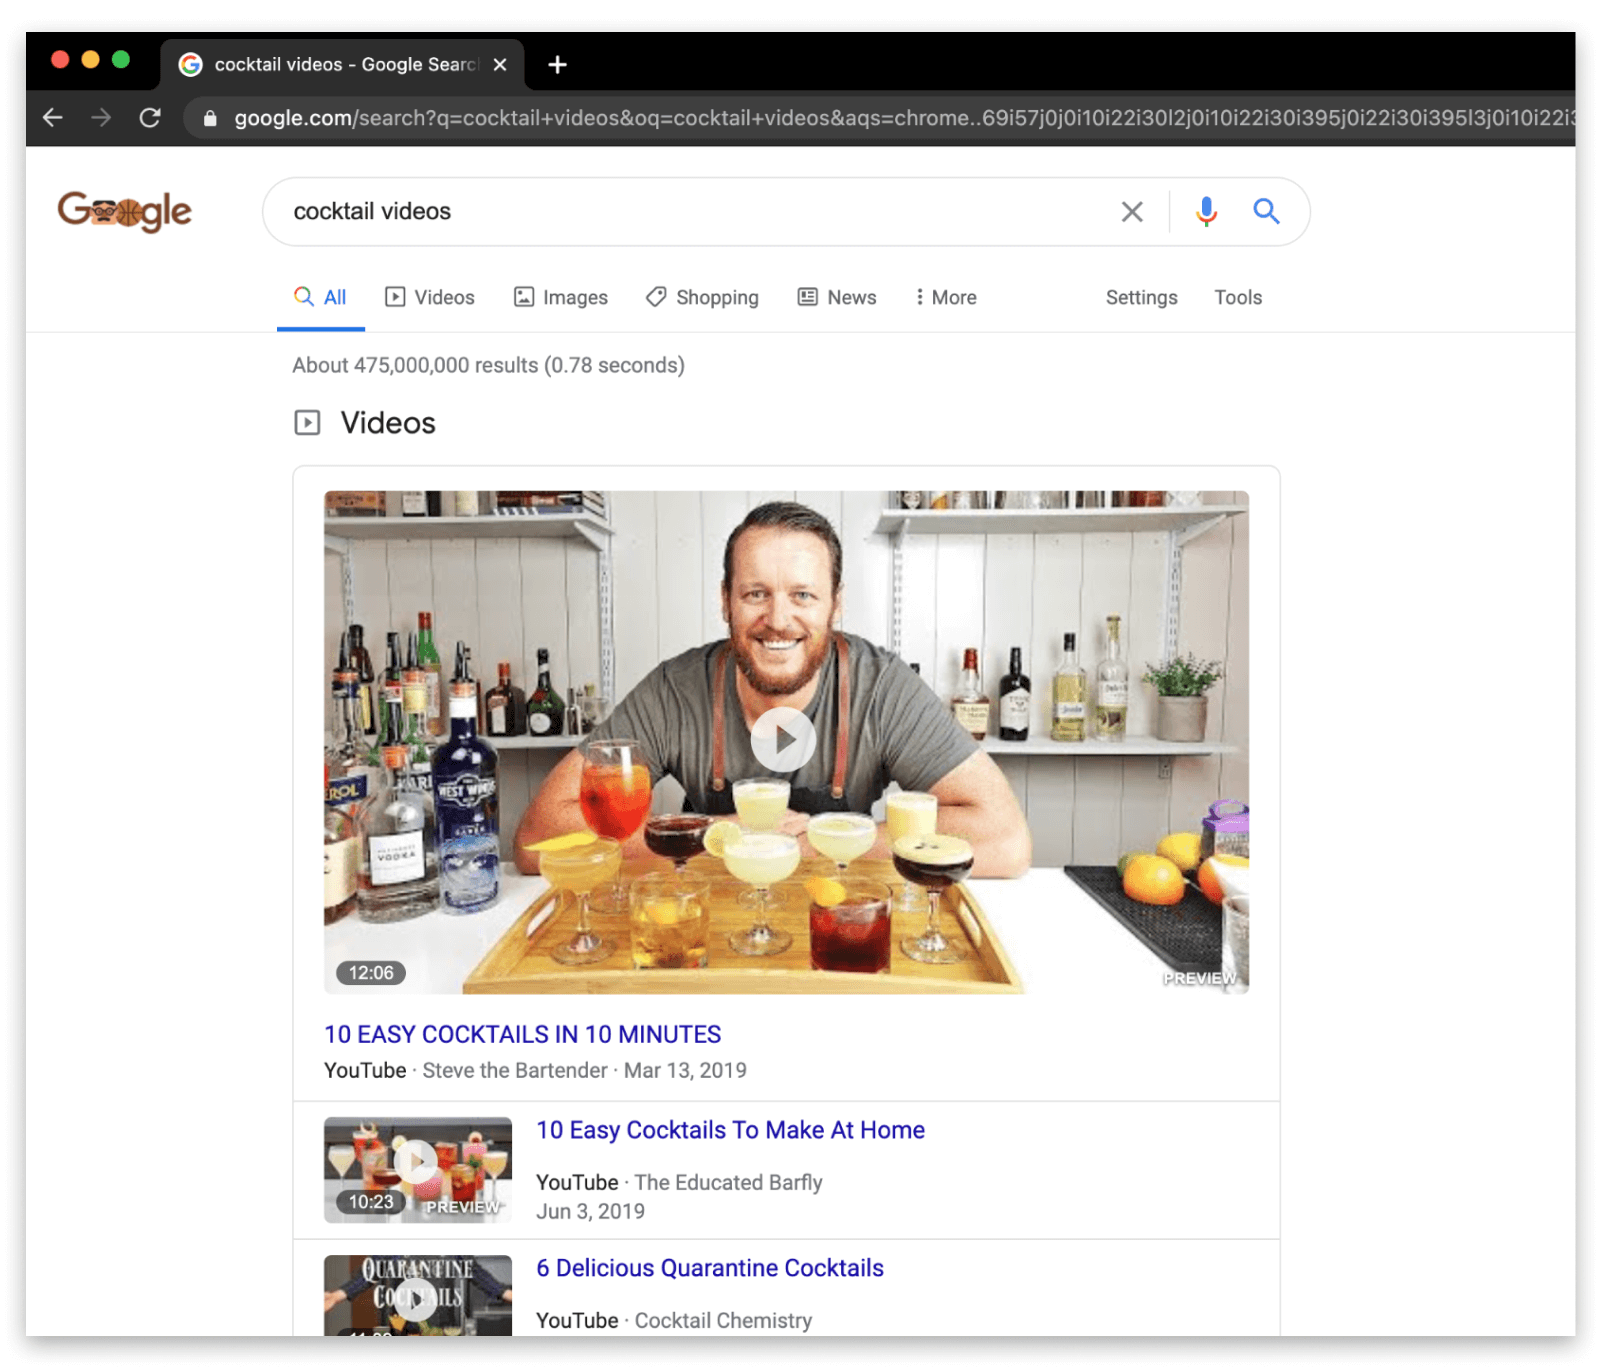 Searching for 'cocktail videos' in Google to discover YouTube waterworks ideas